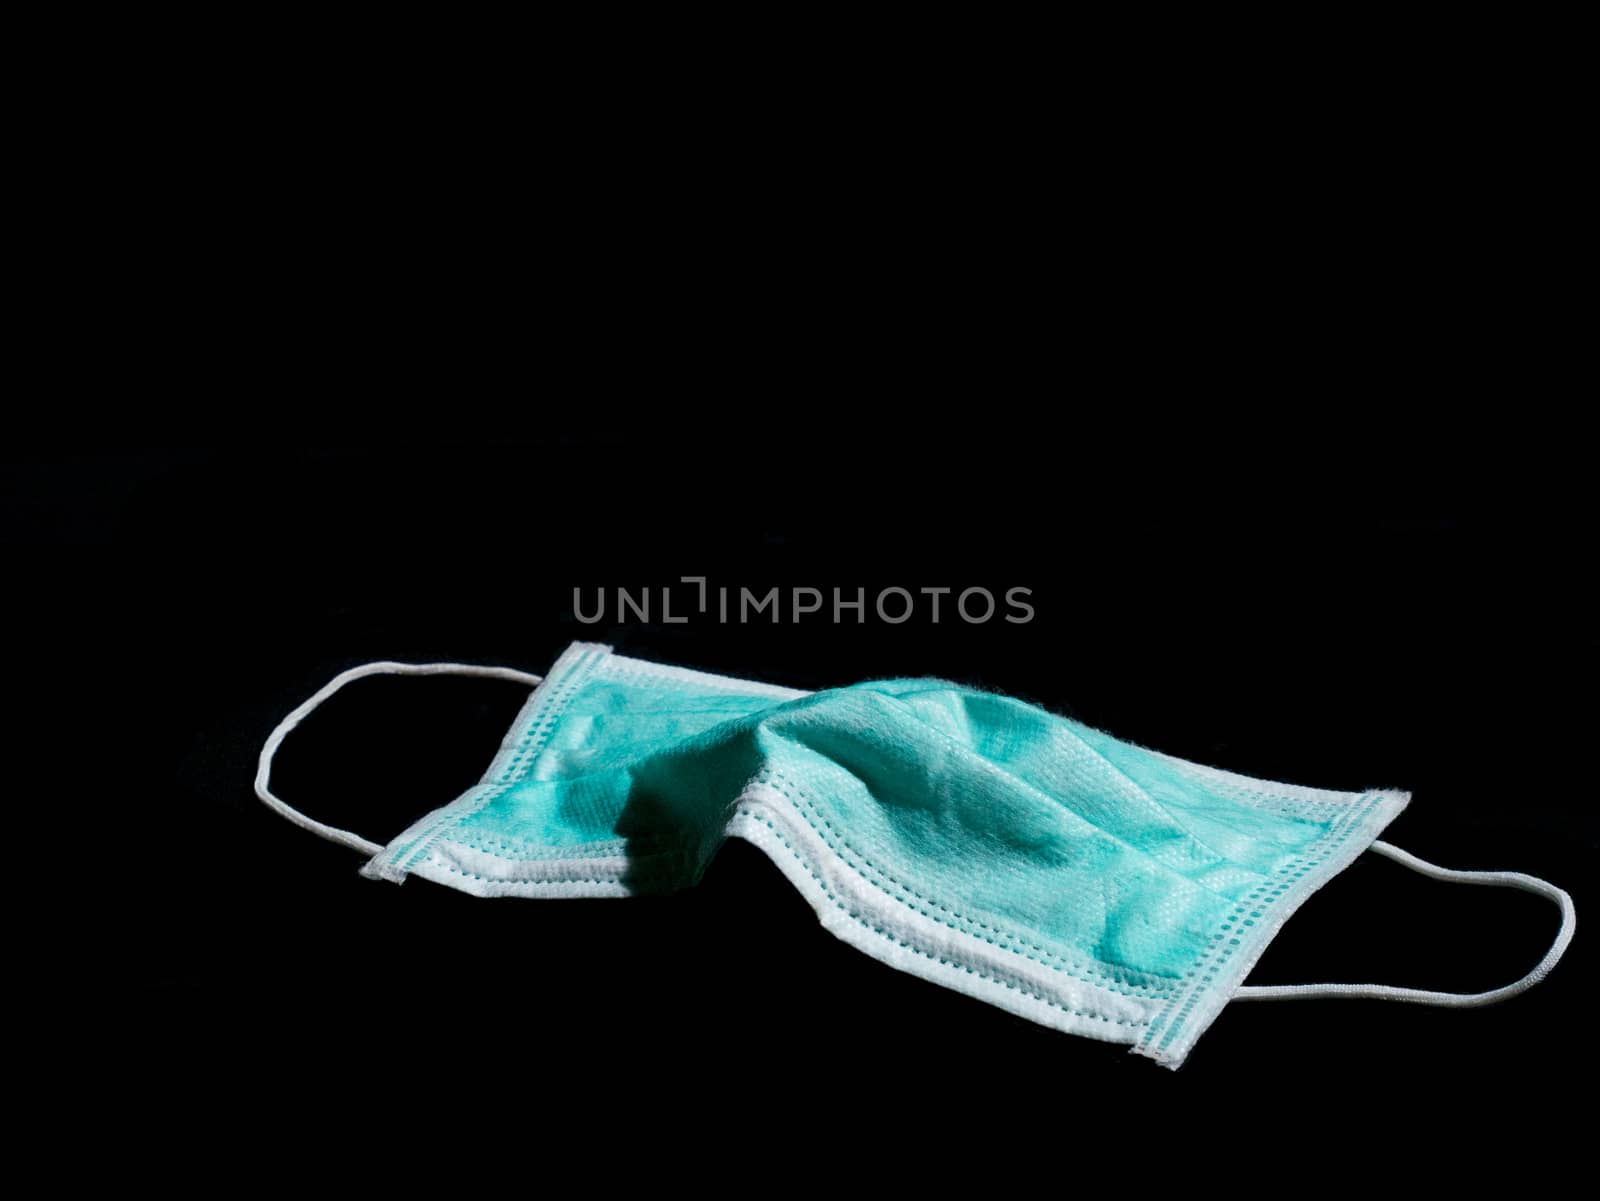 Used surgical mask place on black background with copy space, discarded mask concept. Dark tone.